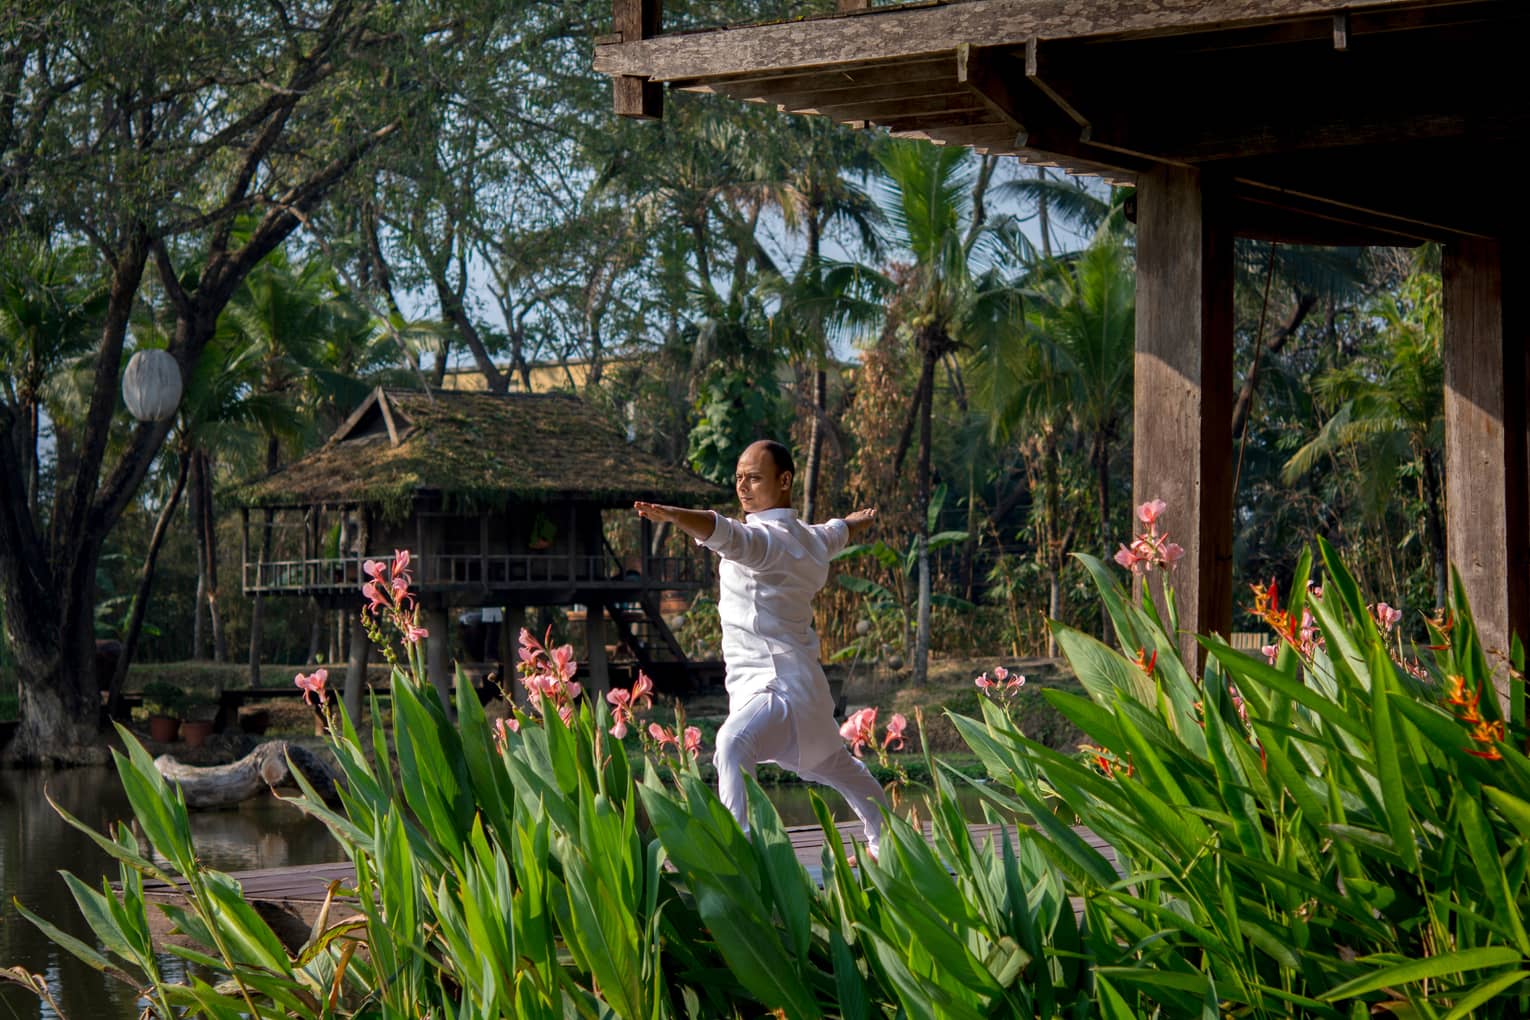 Resident yogi Dheera wearing white in yoga pose with arms outstretched by tall flowers, leaves